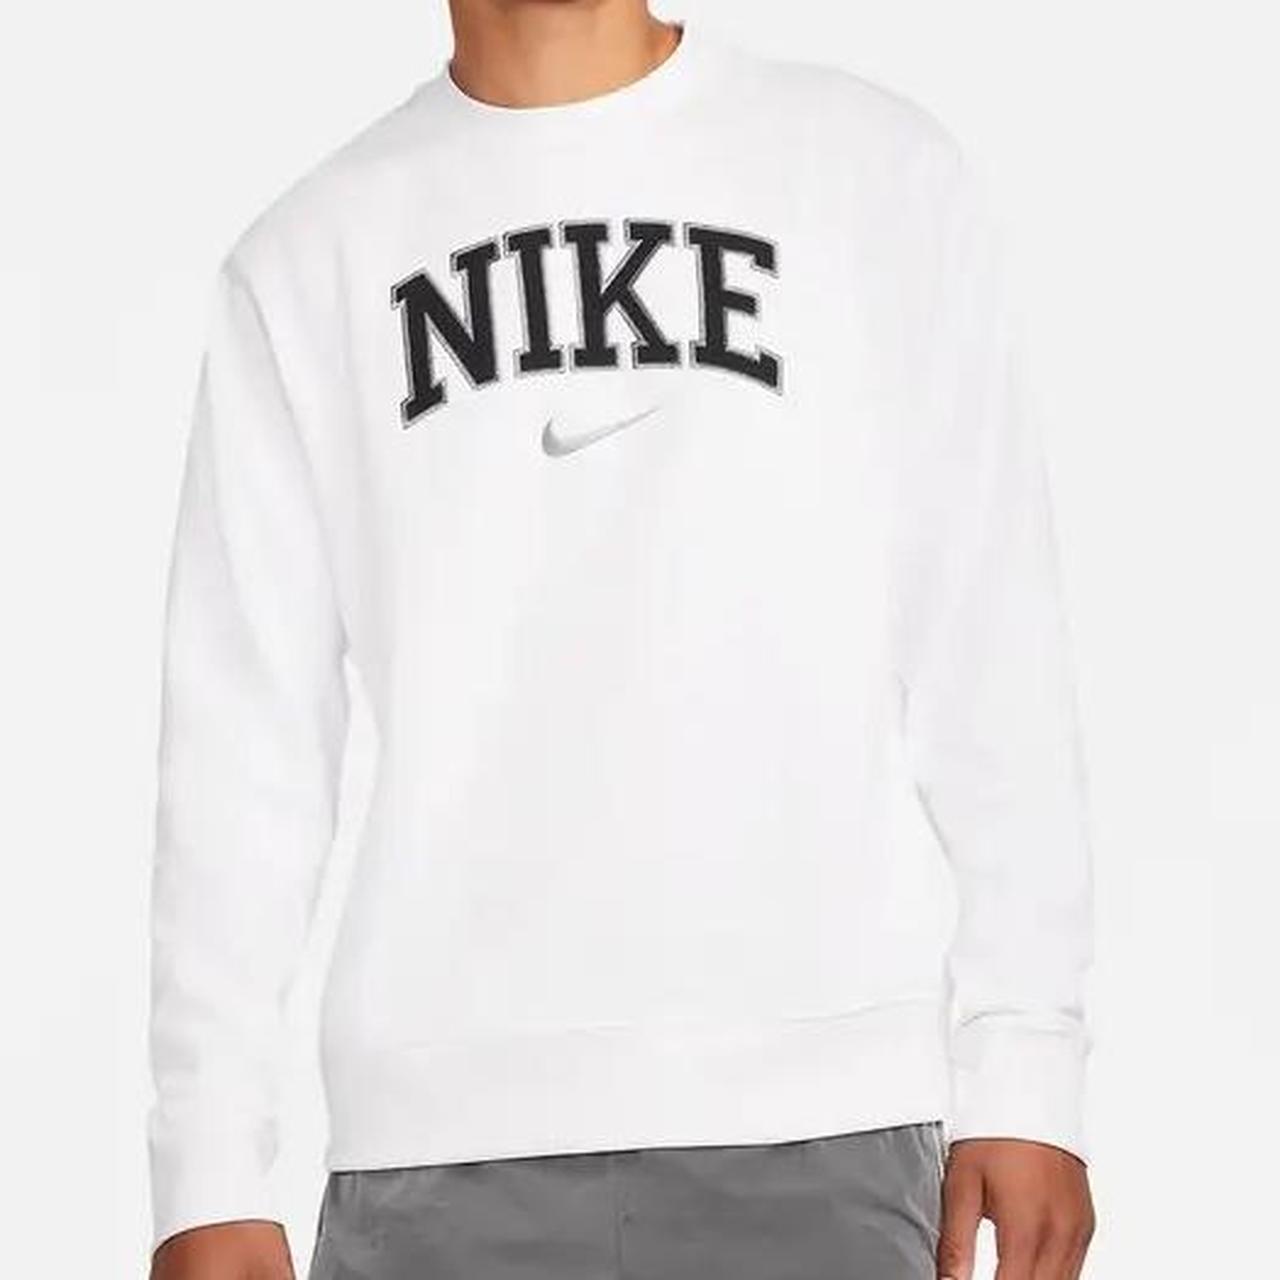 White Nike sweatshirt in size small. Can be men’s or... - Depop